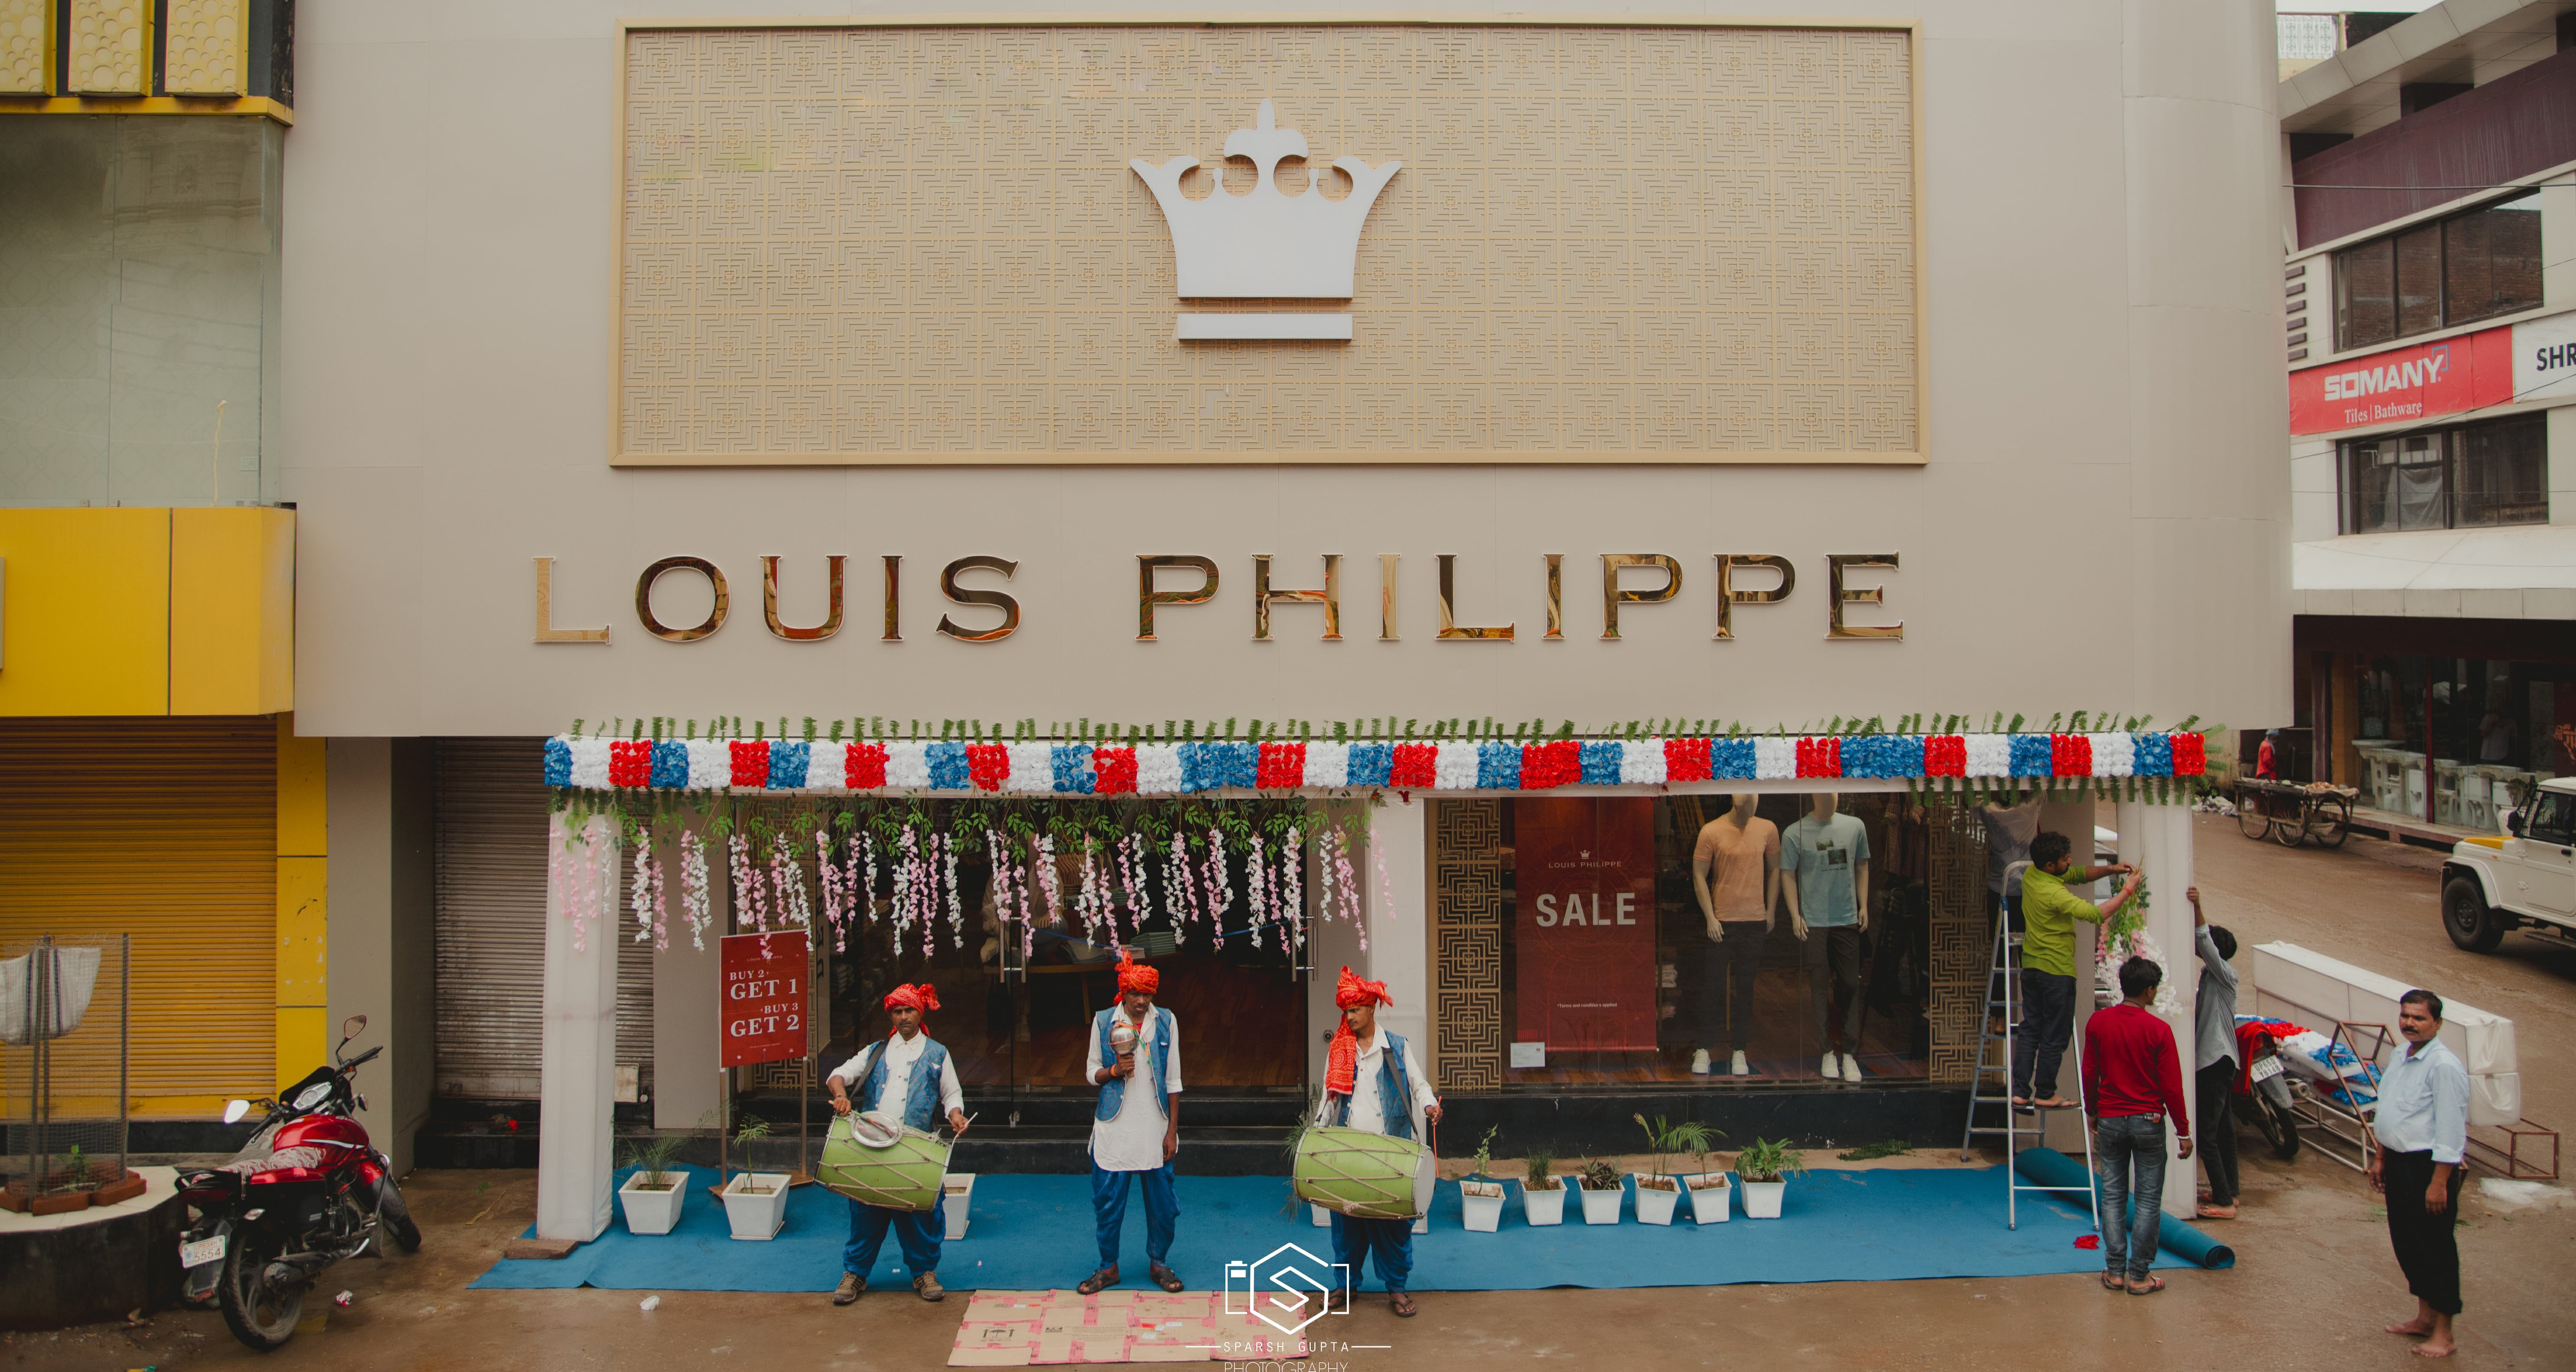 Mirzapur Welcomes Louis Philippe’s 1st Store, Inaugurated by MLA Ratnakar Mishra